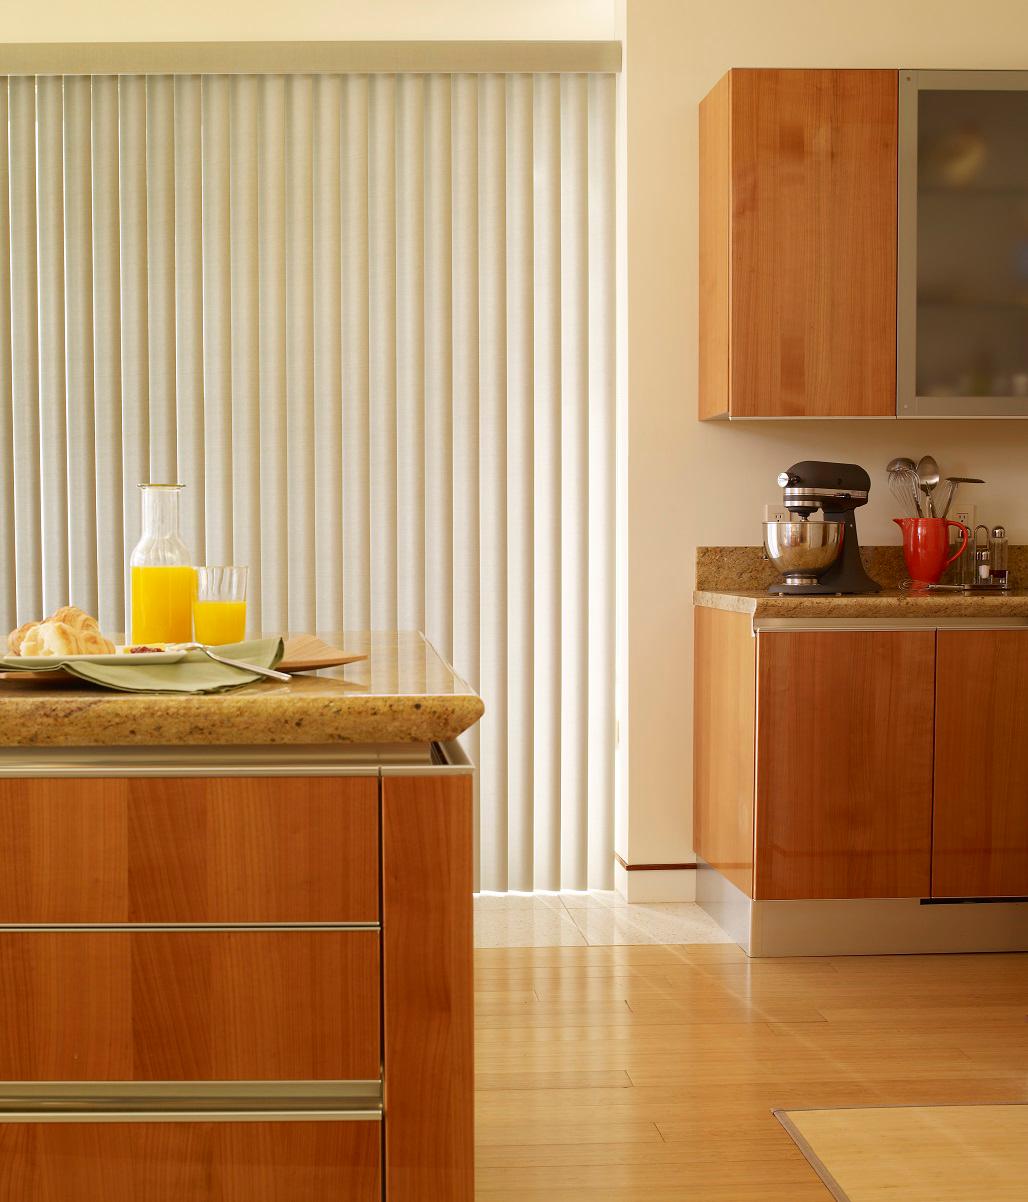 Ready to be enlightened? Then try our Enlightened Vertical Blinds! They're sleek,  easy to use, perfect for both windows and sliding doors-and they look amazing  in this kitchen.  BudgetBlindsLosGatos   VerticalBlinds  FreeConsultation  WindowWednesday